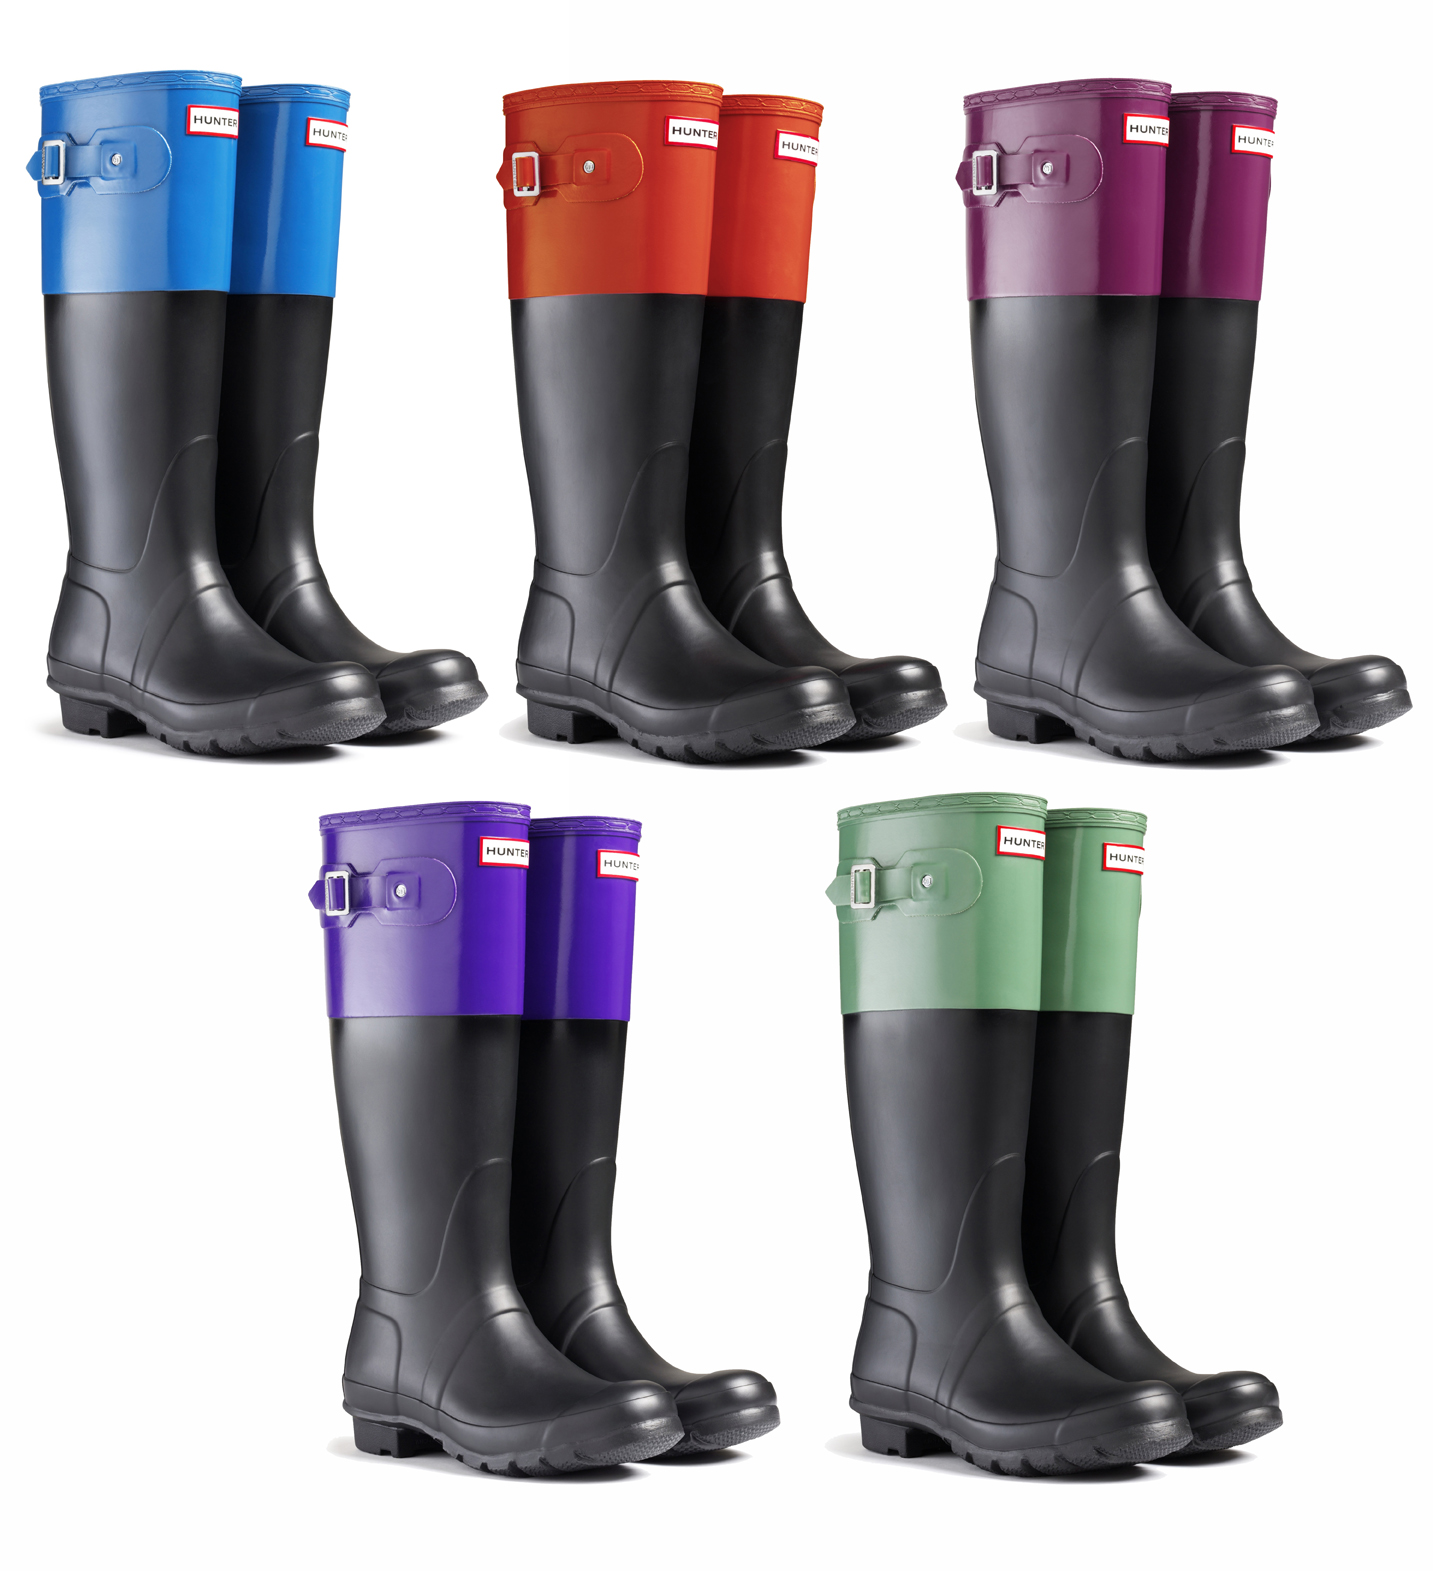 two tone hunter boots